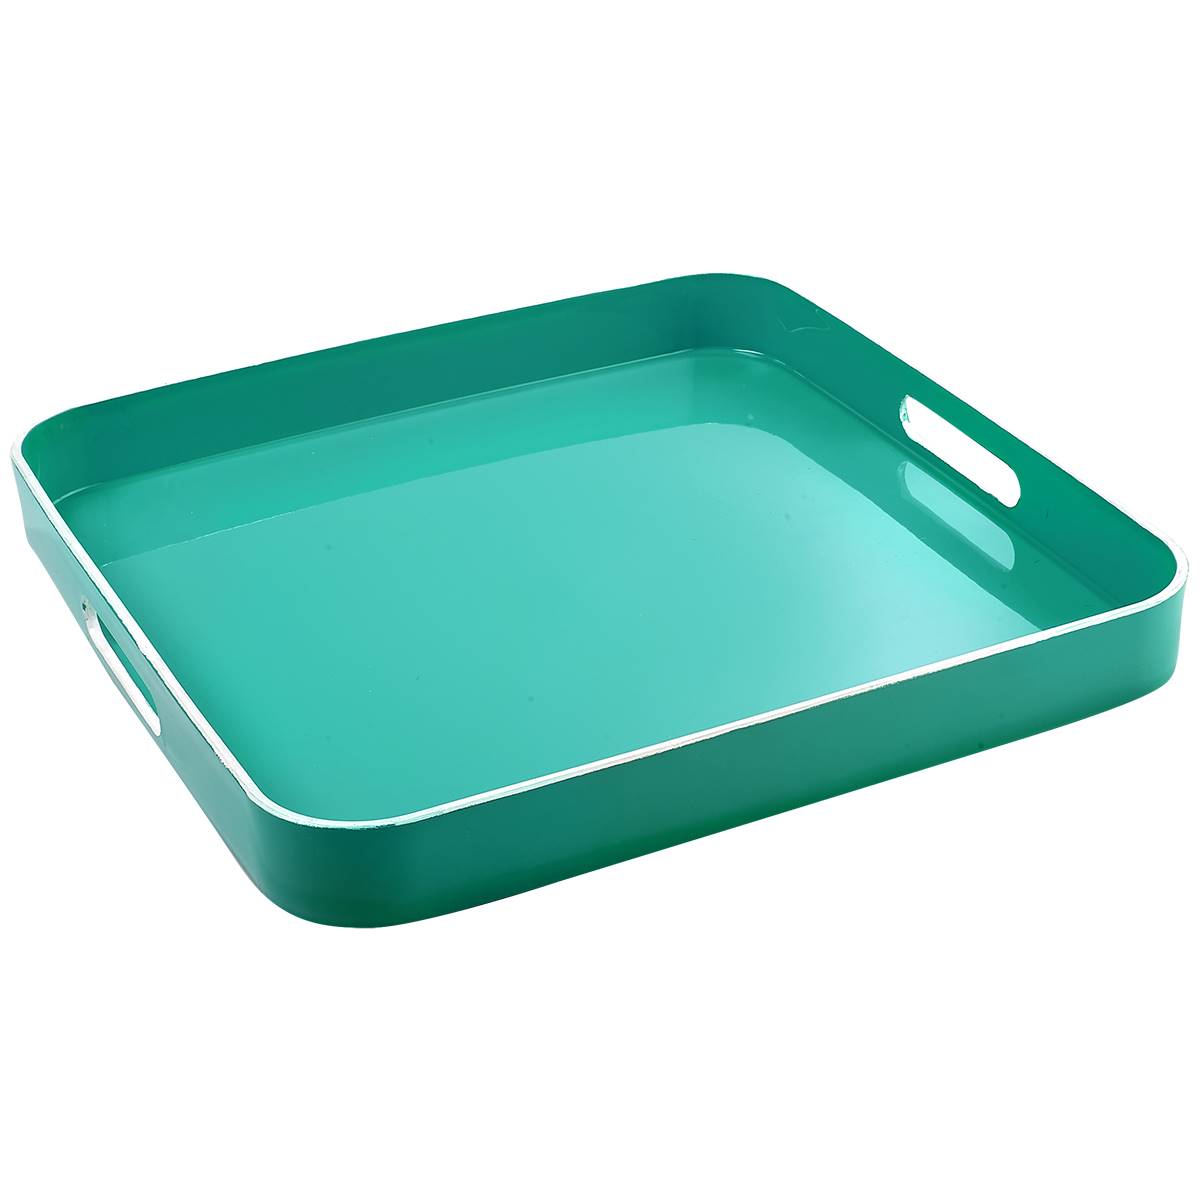 Jay Import Large Square Tray With Rim & Handle - Turquoise